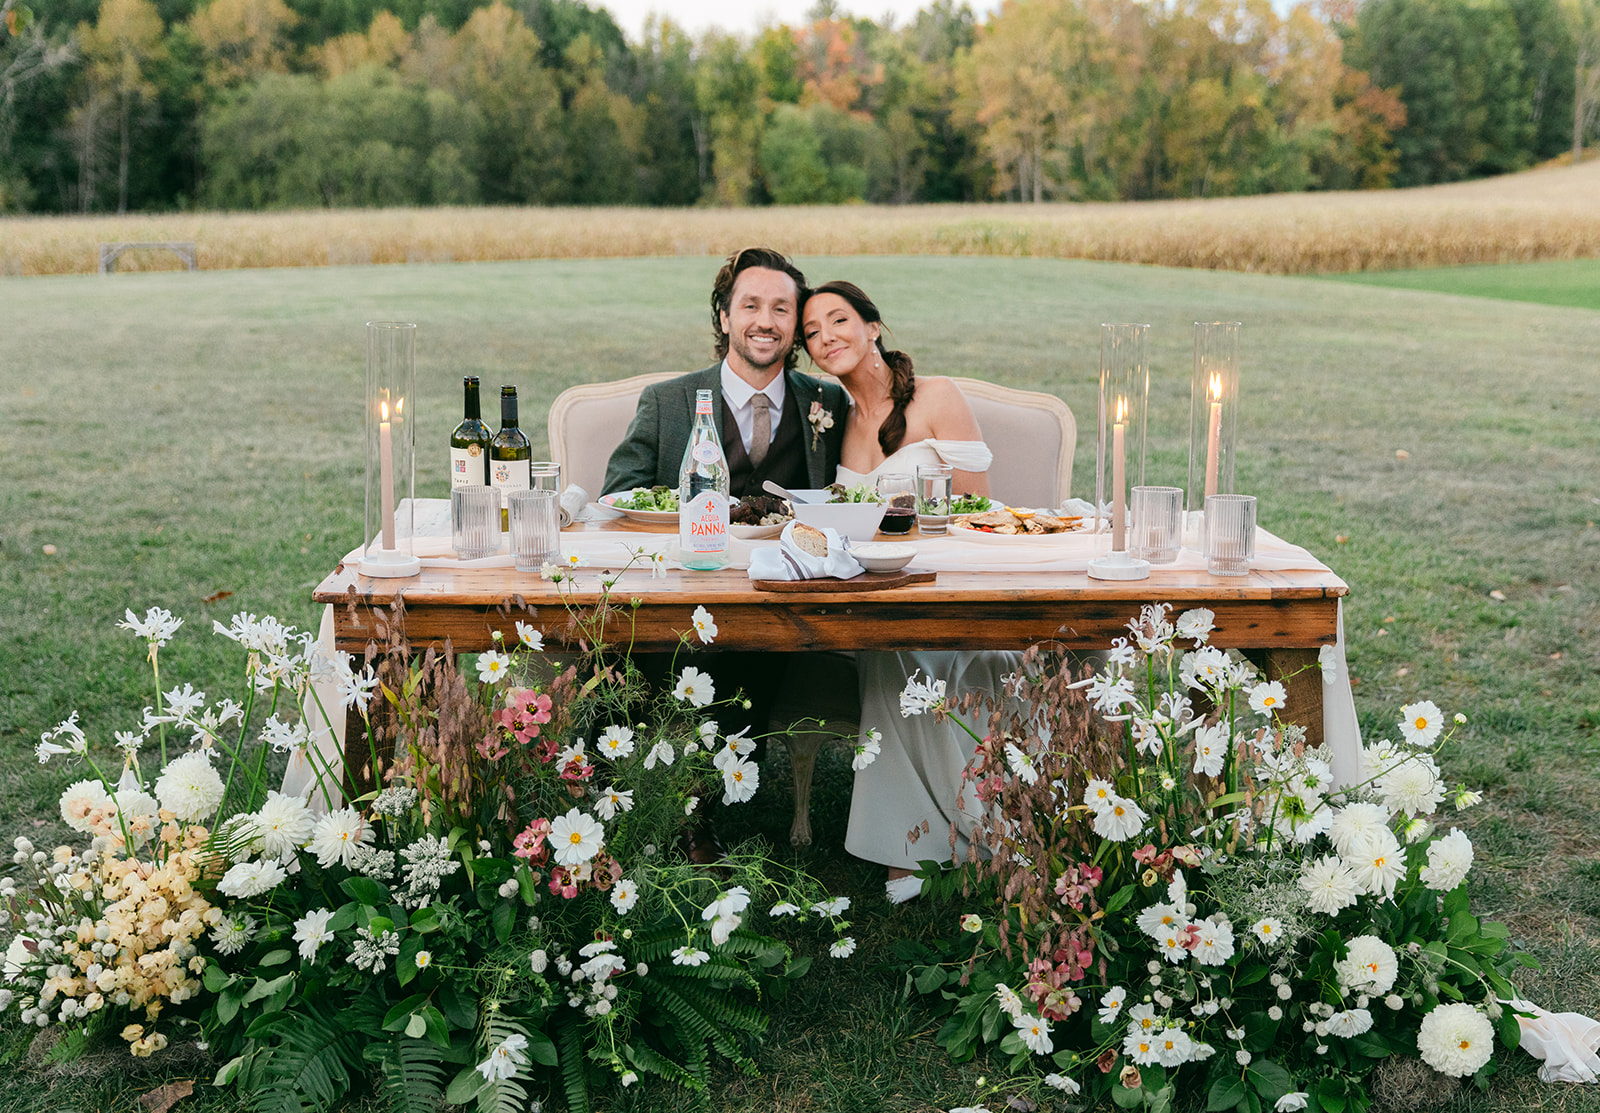 Bride and Groom enjoying their wedding meal at a table with bottles of wine and candles, at an outdoor venue.